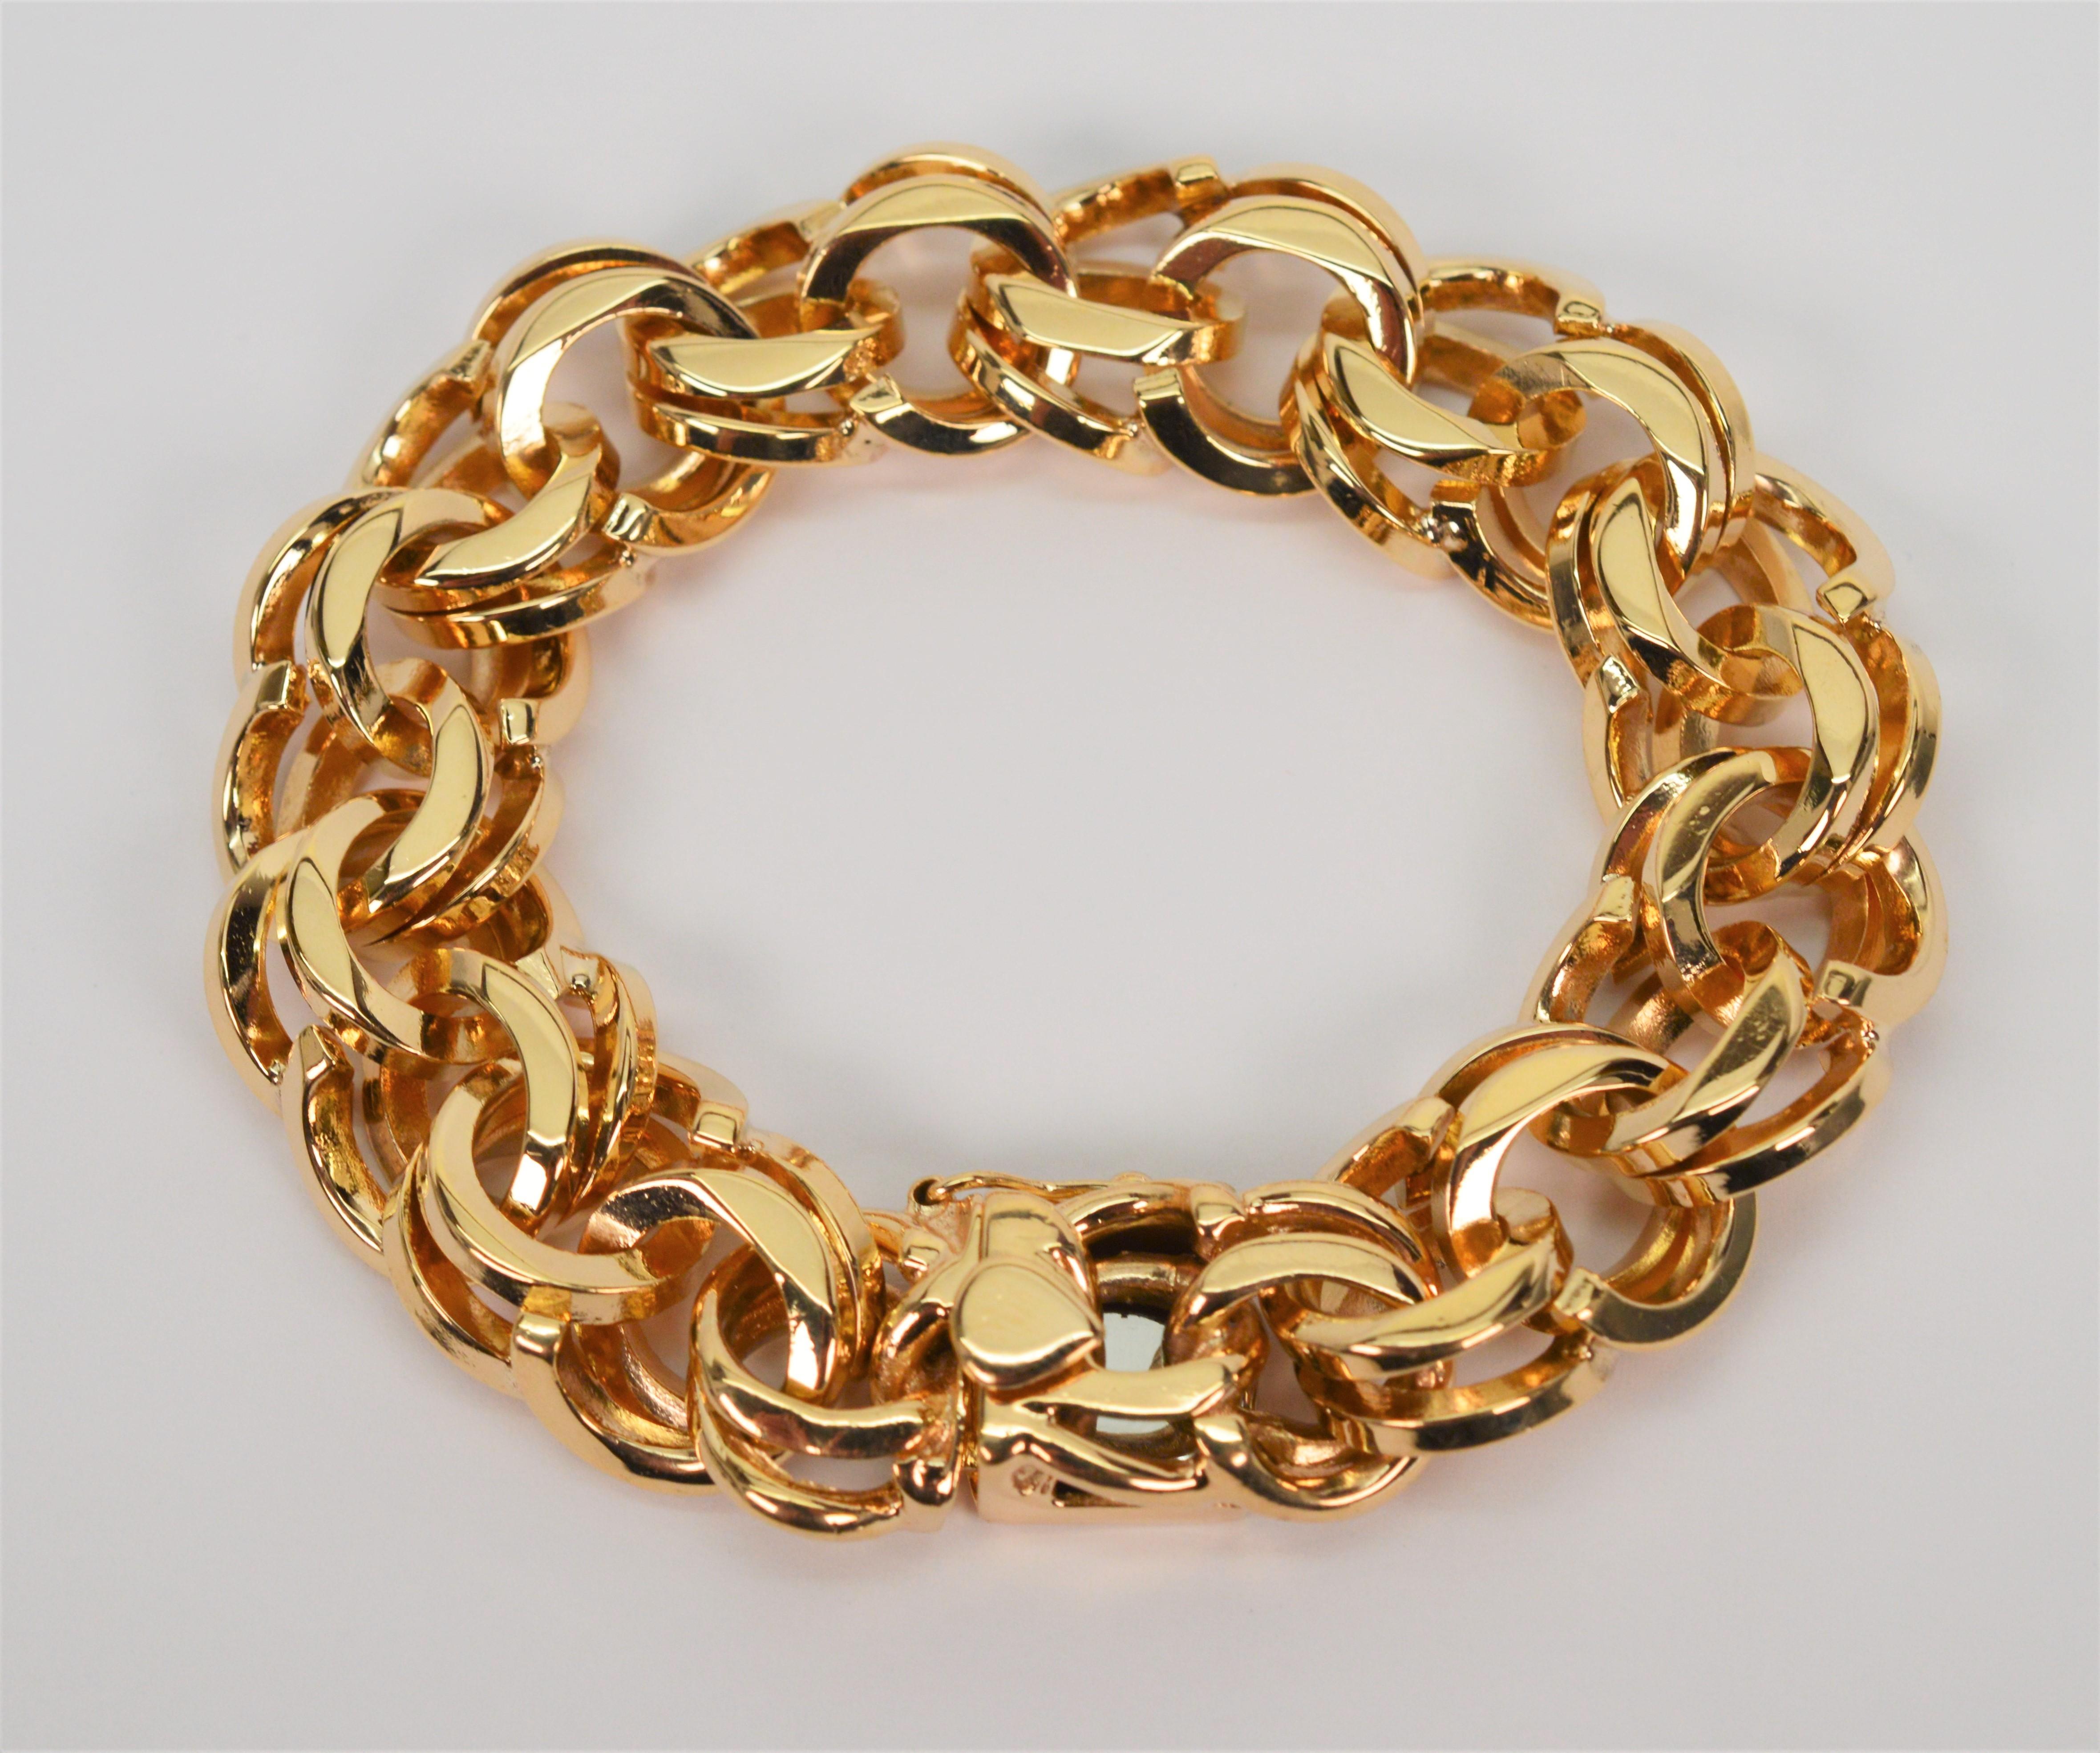 Bright Polish 14 Karat Gold Double Loop Link Chain Bracelet In Excellent Condition For Sale In Mount Kisco, NY